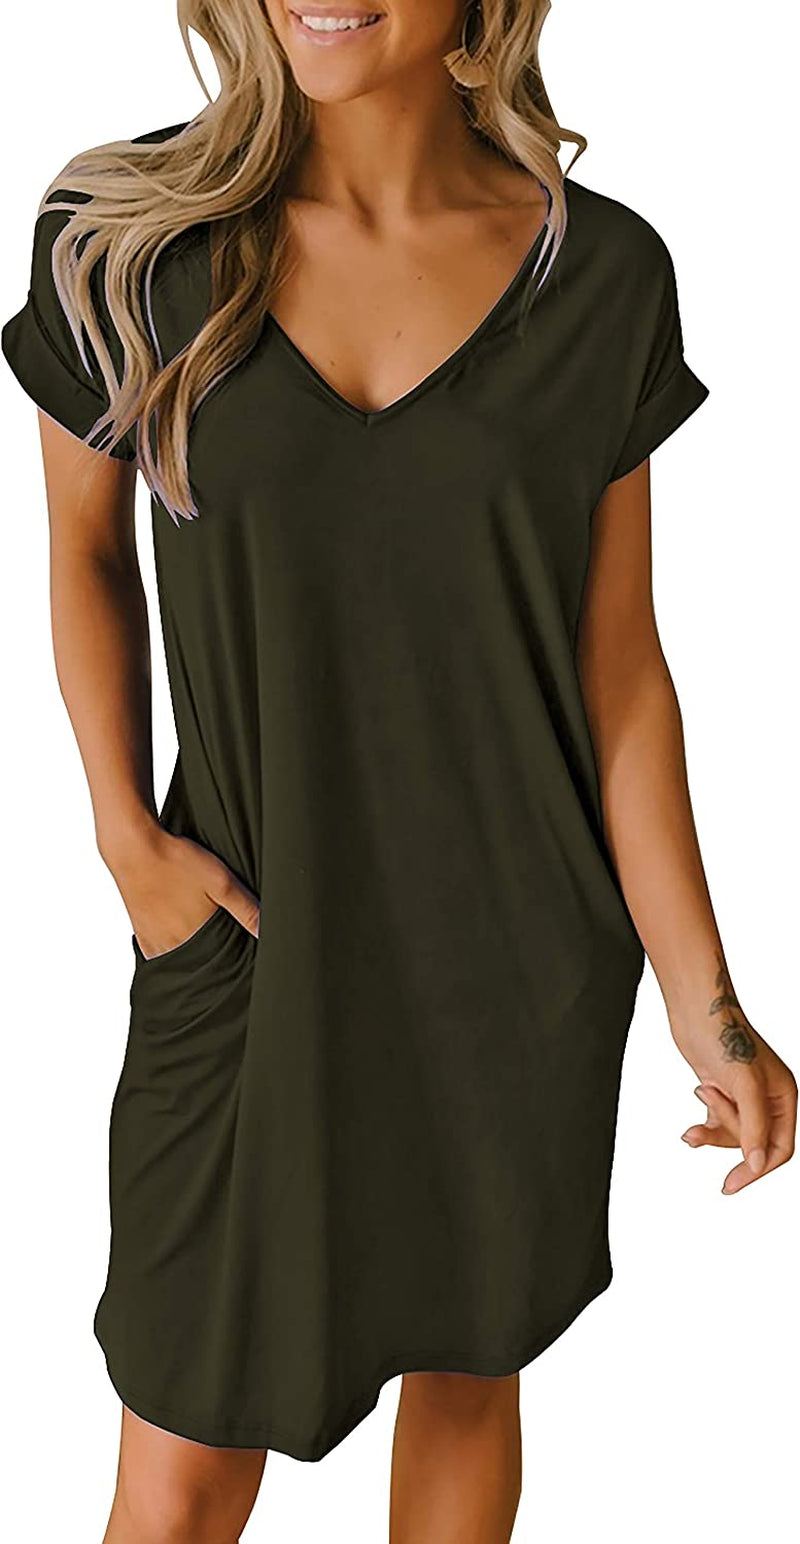 My favorite tunic dresses  Tunic dress, Casual tops for women